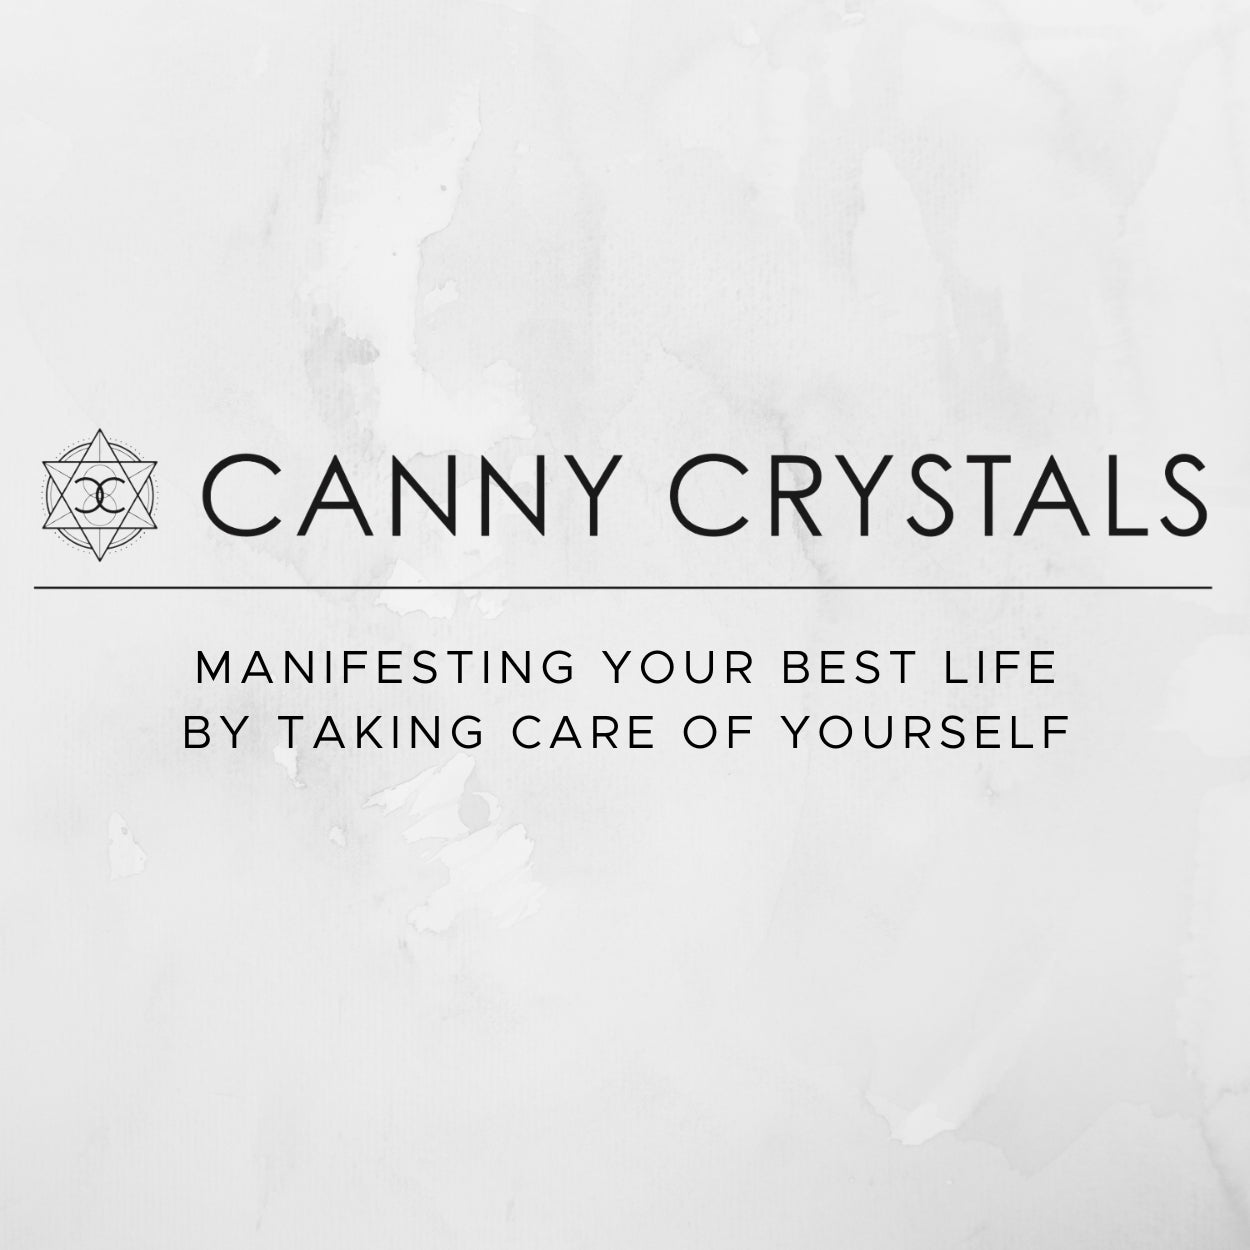 Manifesting your Best Life by Taking Care of Yourself